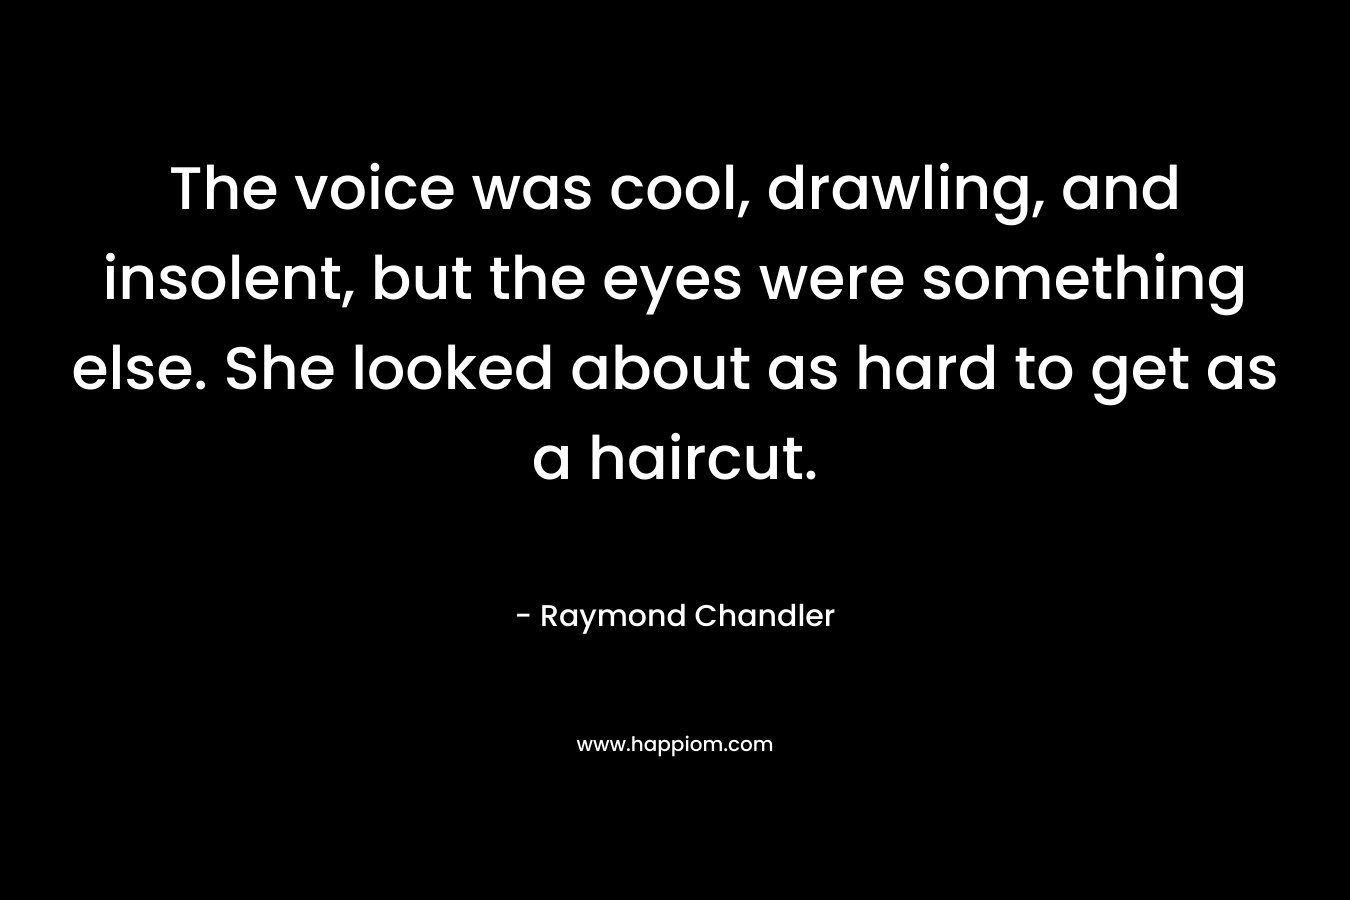 The voice was cool, drawling, and insolent, but the eyes were something else. She looked about as hard to get as a haircut. – Raymond Chandler